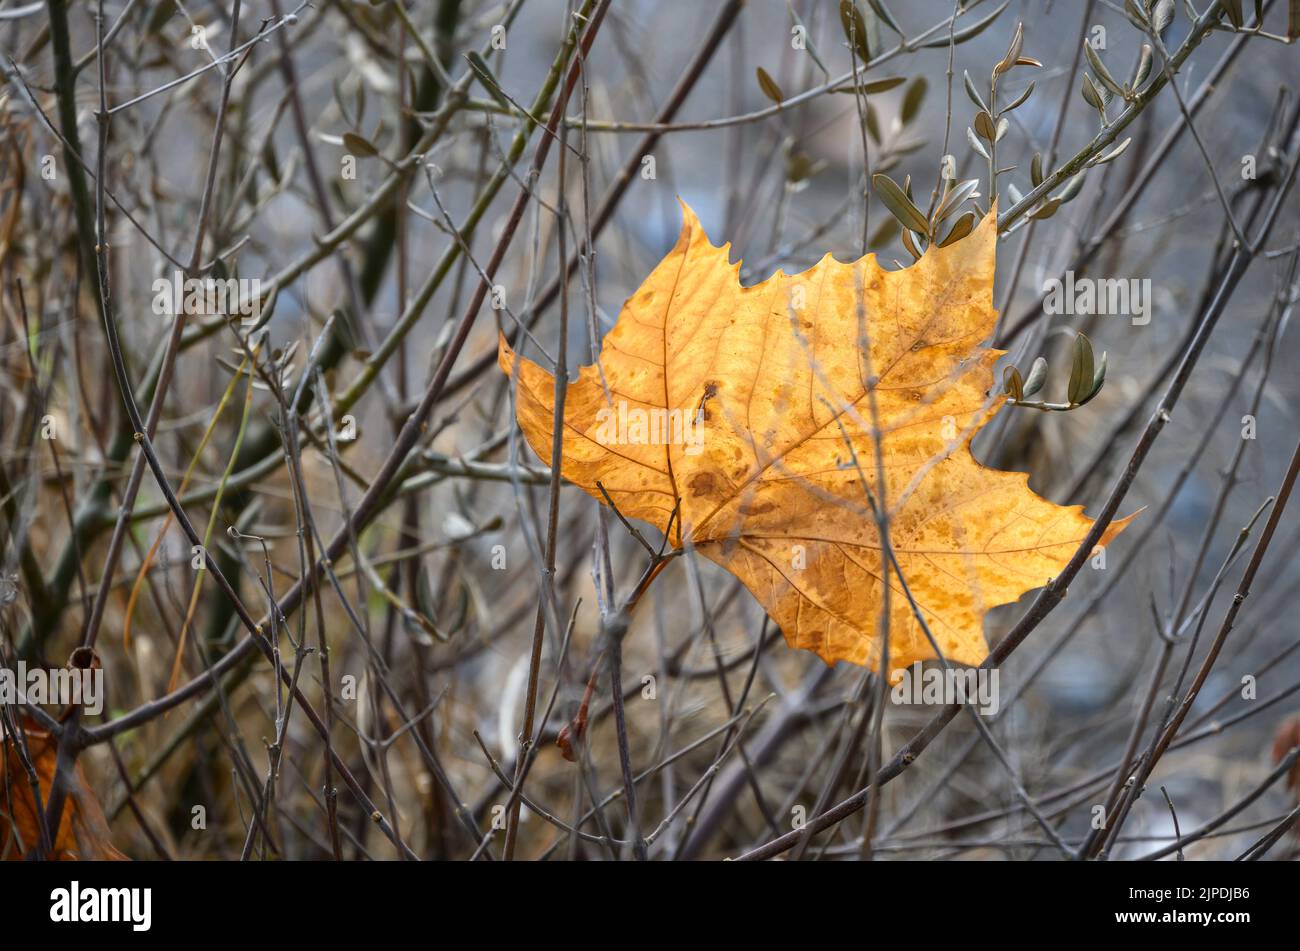 A fallen, Autumn, leaf caught in branches. Stock Photo